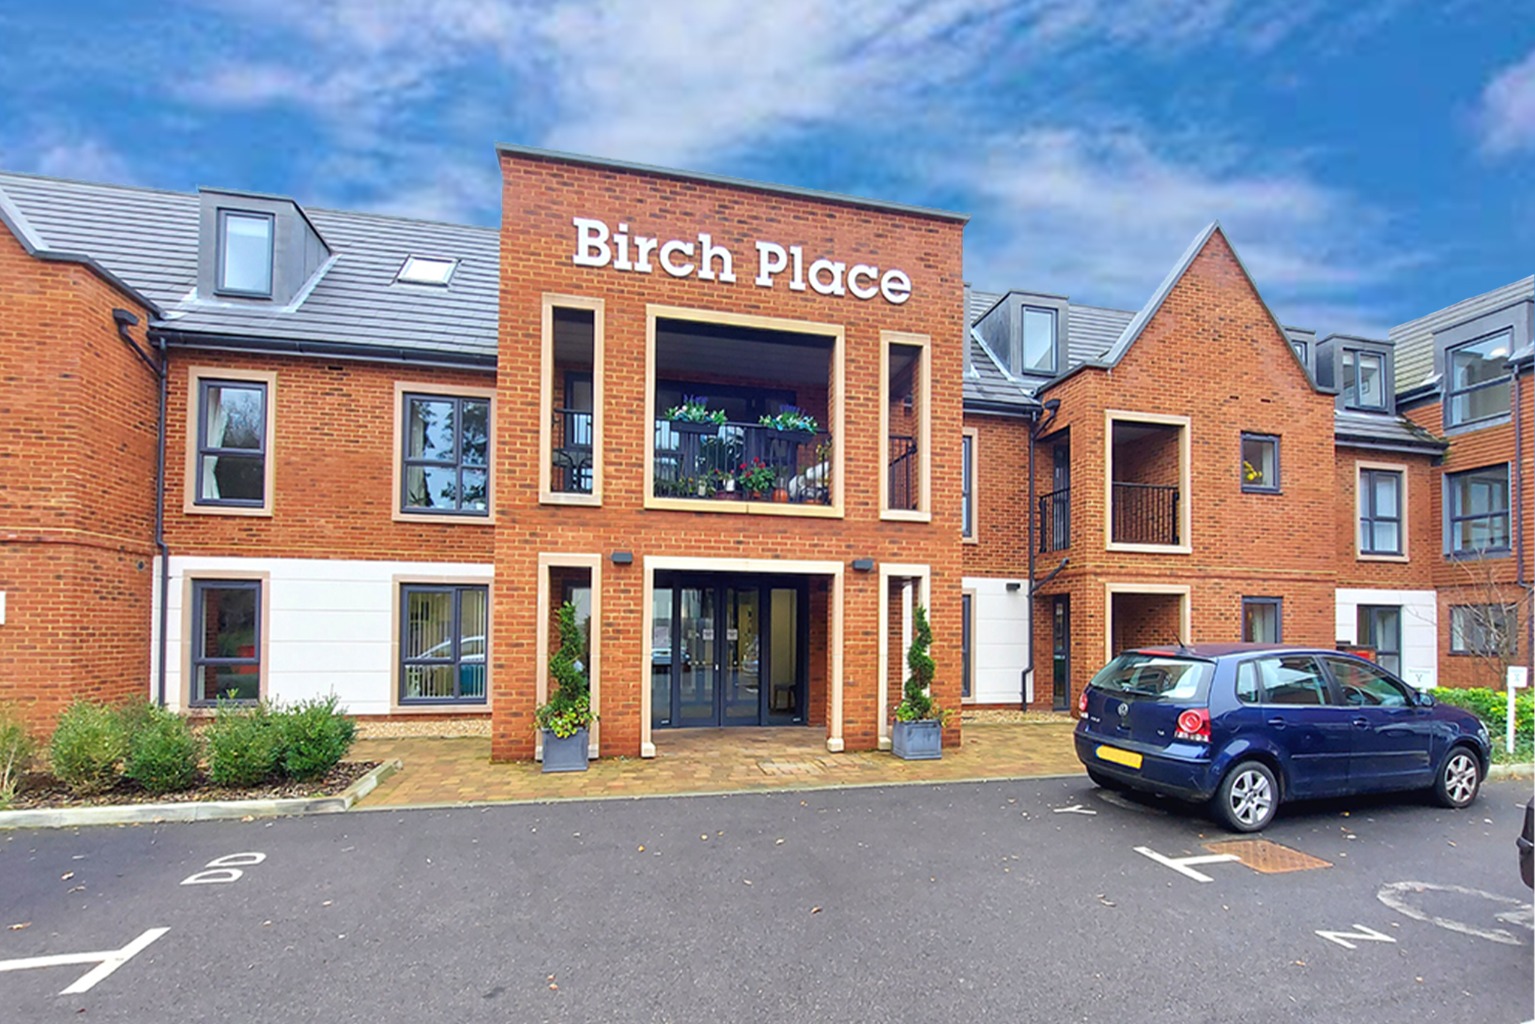 This stunning one bedroom ground floor retirement property, built by award winning developers Mcarthy & Stone, is in excellent condition throughout. Benefitting from a communal lounge, Bistro restaurant, landscaped gardens and no chain. Get in touch for your exclusive tour